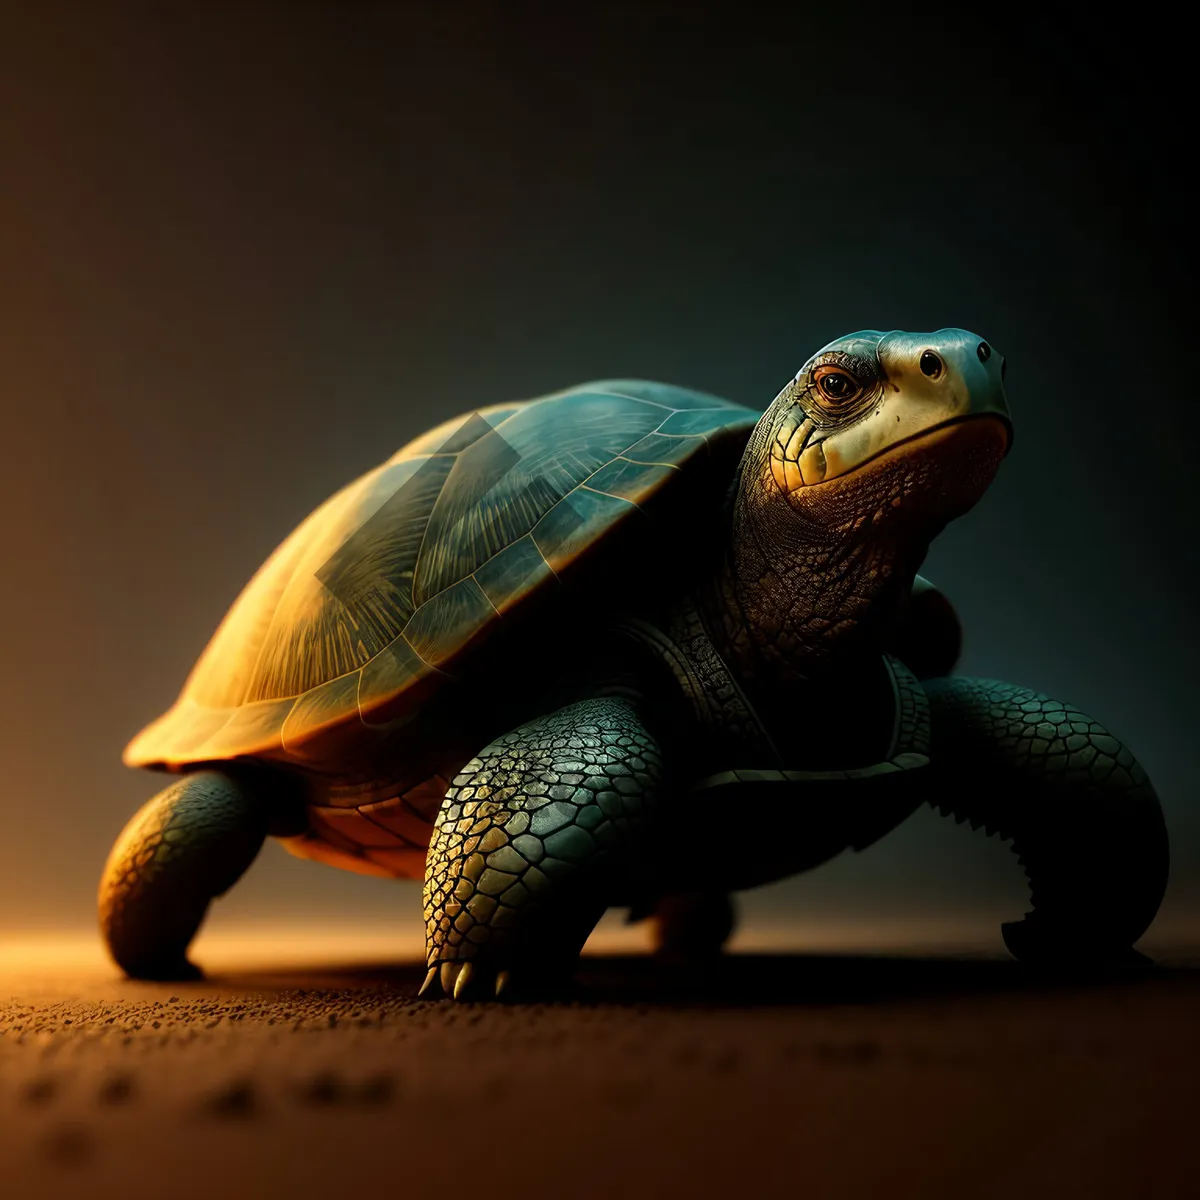 Picture of Slow and Steady Terrapin: A Protective Reptile in its Shell